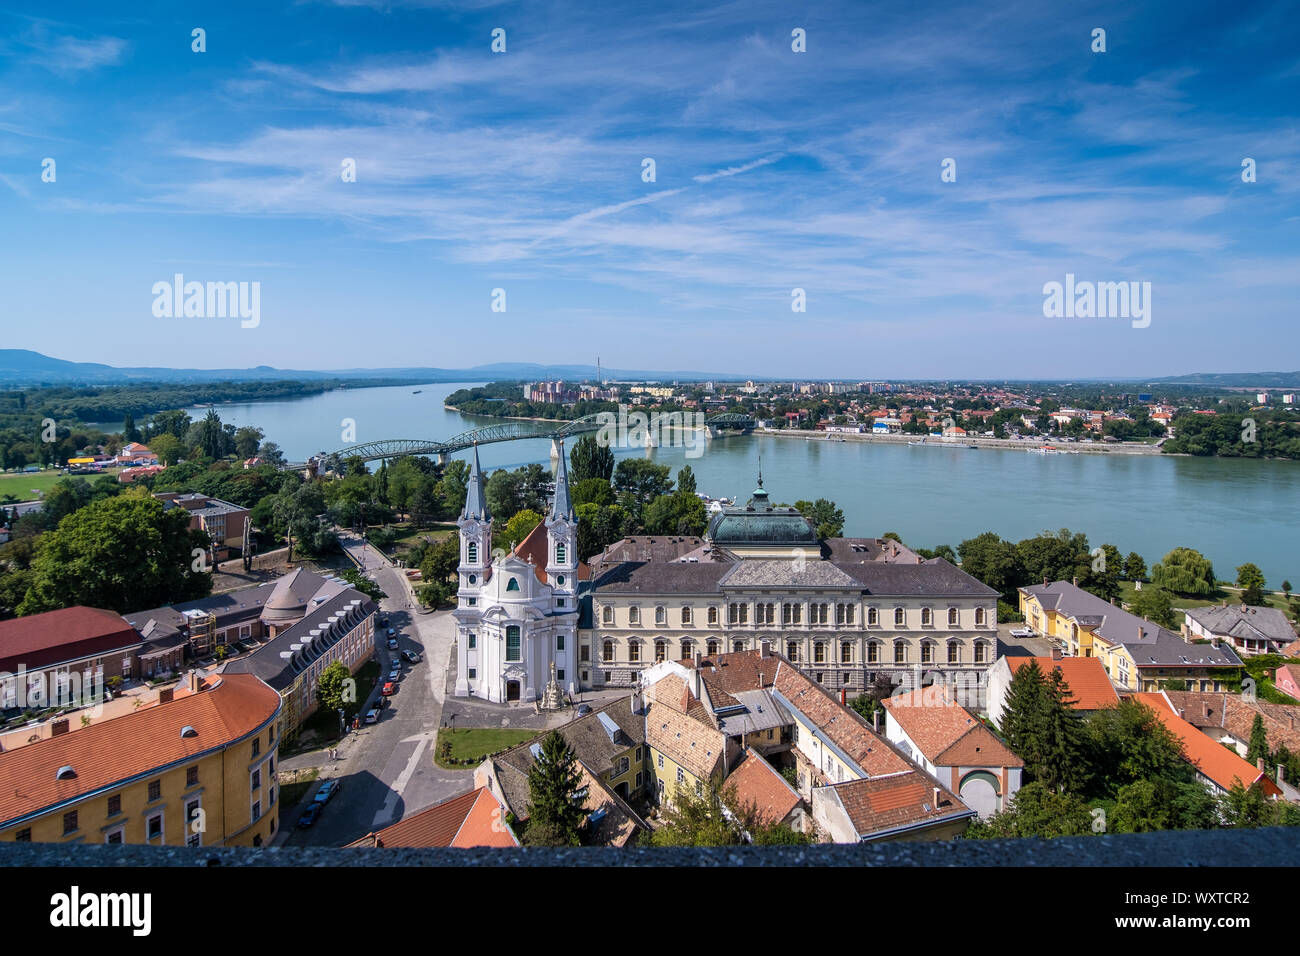 ESZTERGOM, HUNGARY - AUGUST 20, 2019: The Christian Museum as seen from the Castle hill Stock Photo